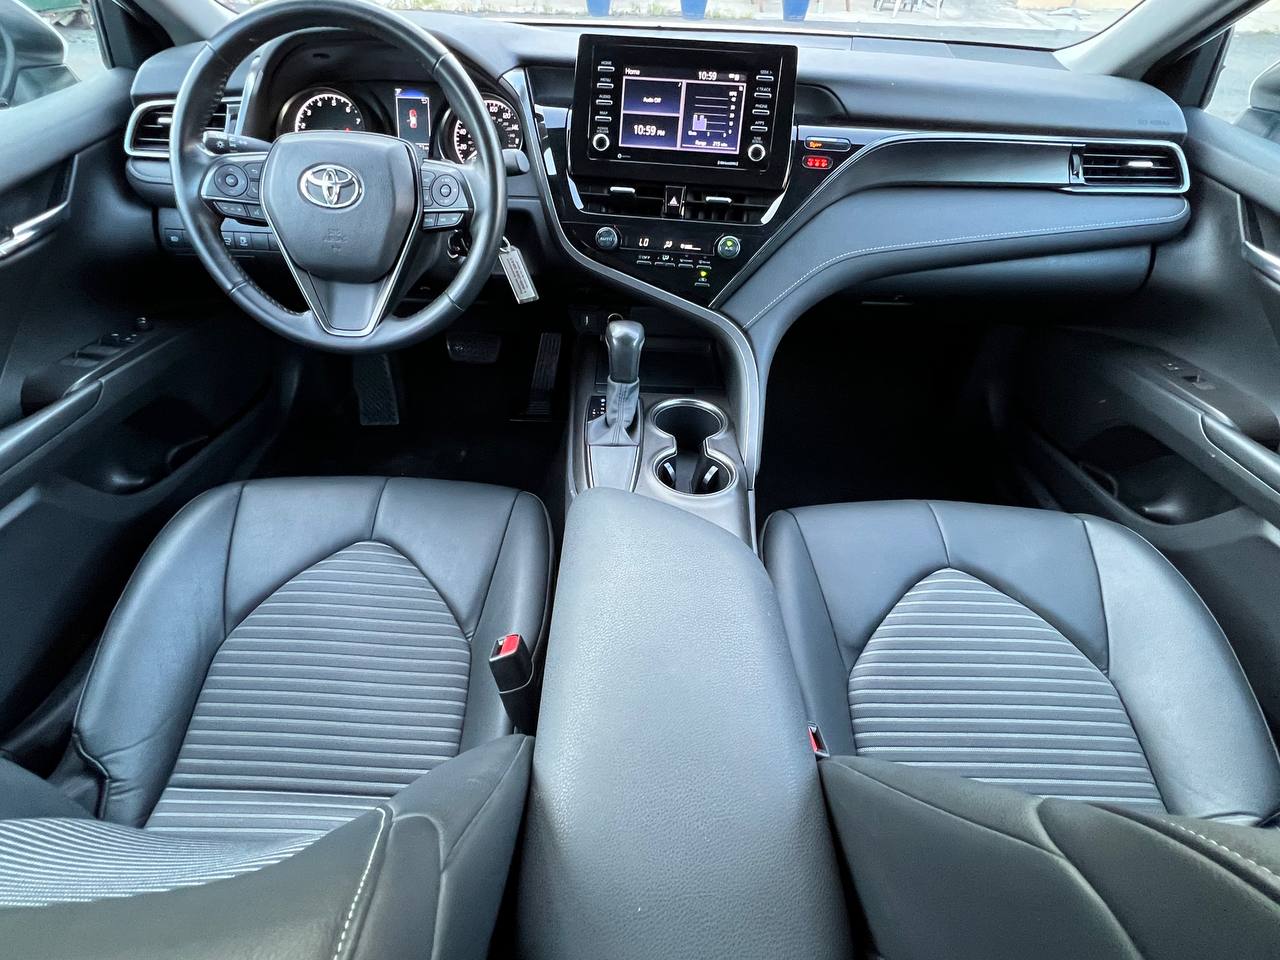 Used - Toyota Camry SE Sedan for sale in Staten Island NY